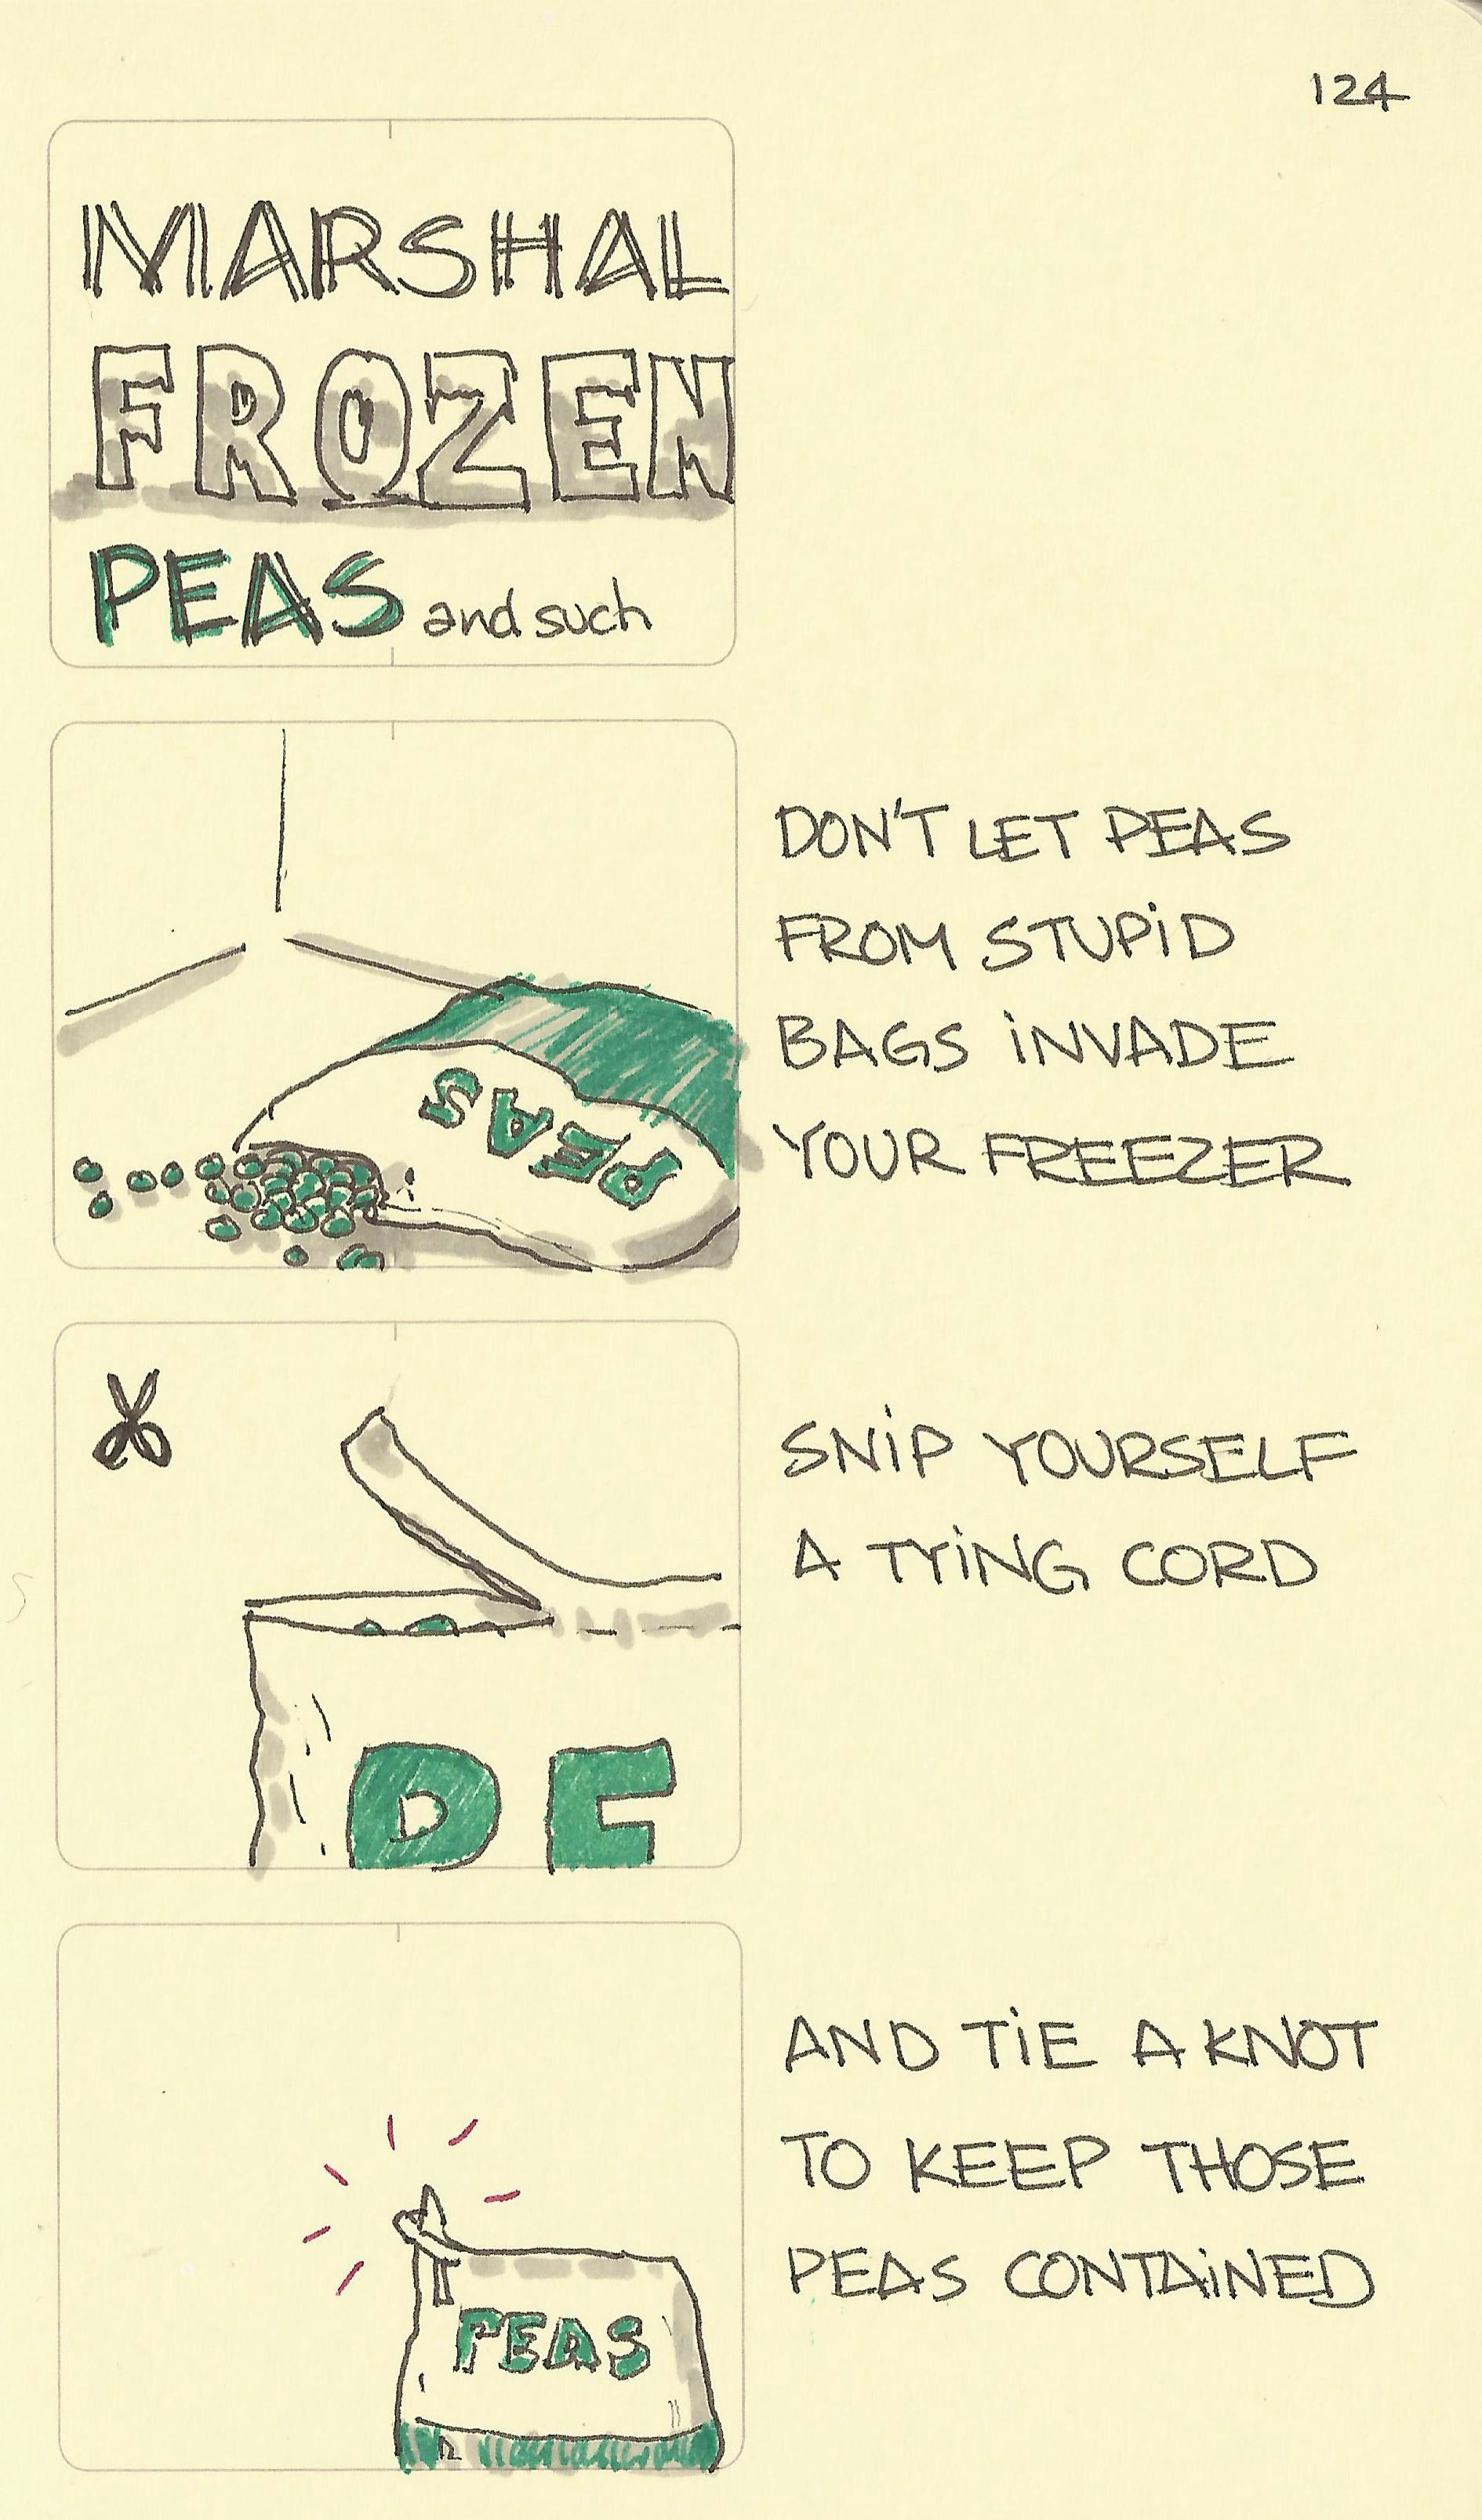 Marshal frozen peas and such - Sketchplanations